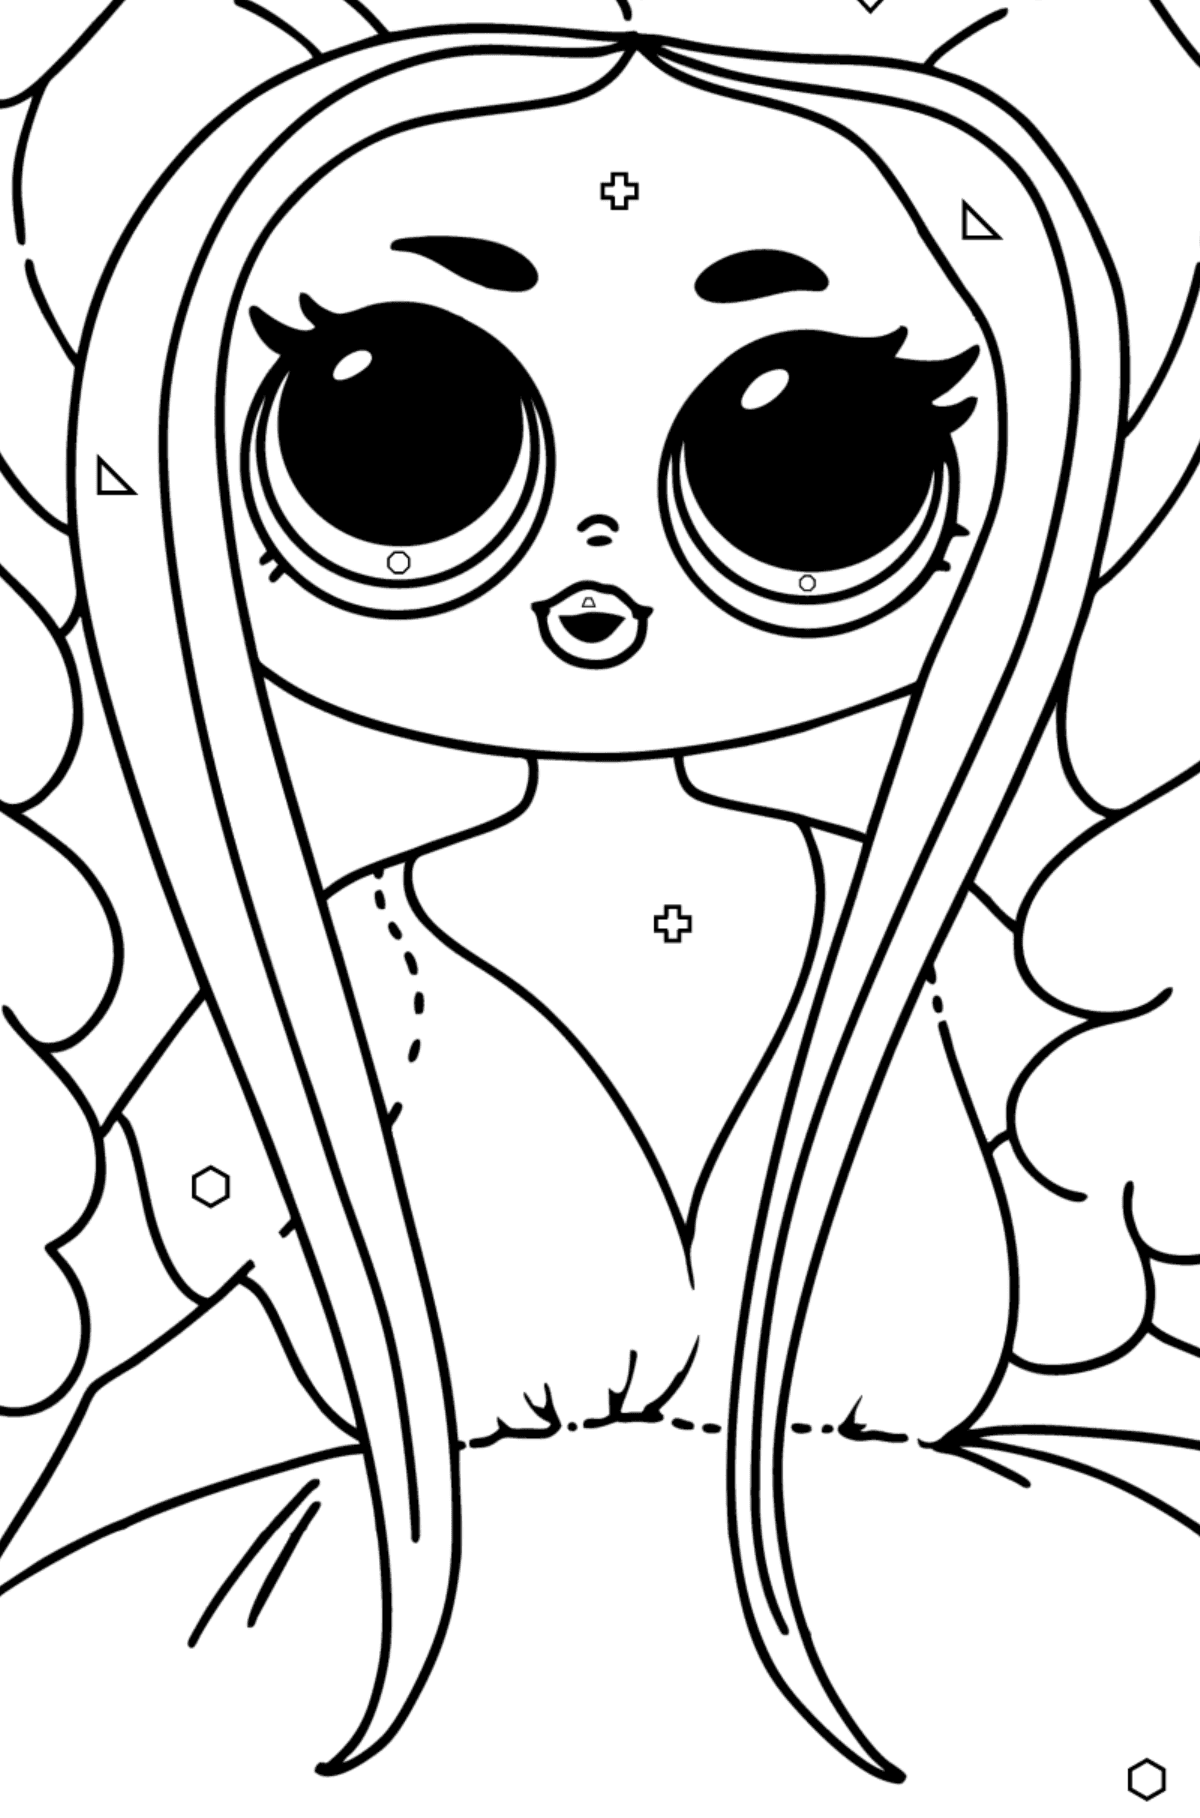 Coloring page LOL OMG Honeylicious Doll - Coloring by Geometric Shapes for Kids